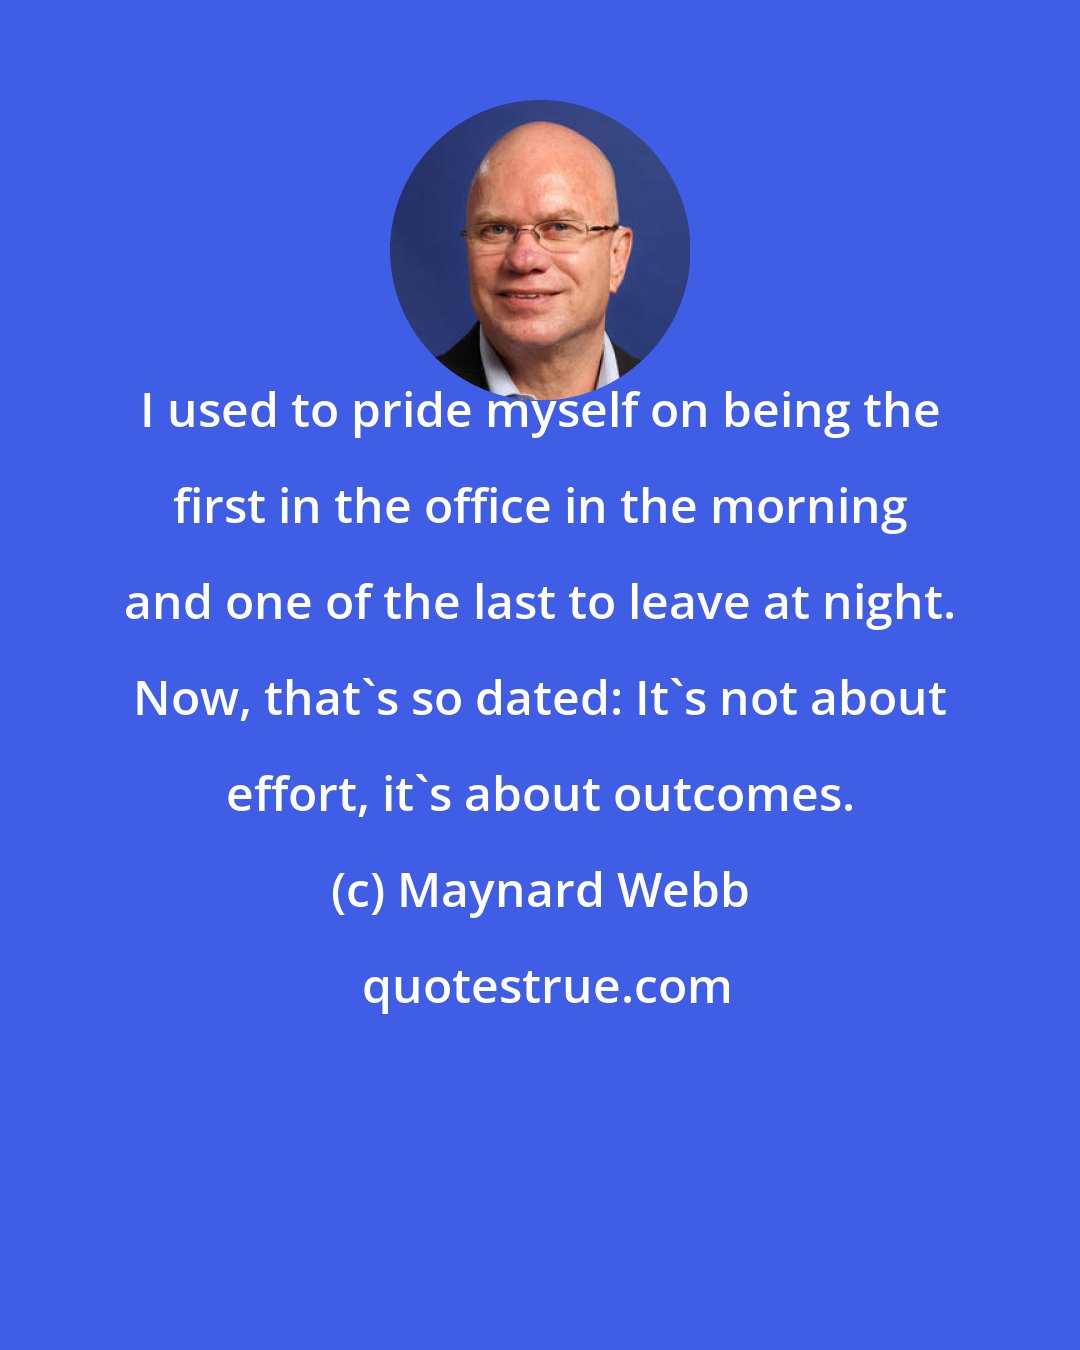 Maynard Webb: I used to pride myself on being the first in the office in the morning and one of the last to leave at night. Now, that's so dated: It's not about effort, it's about outcomes.